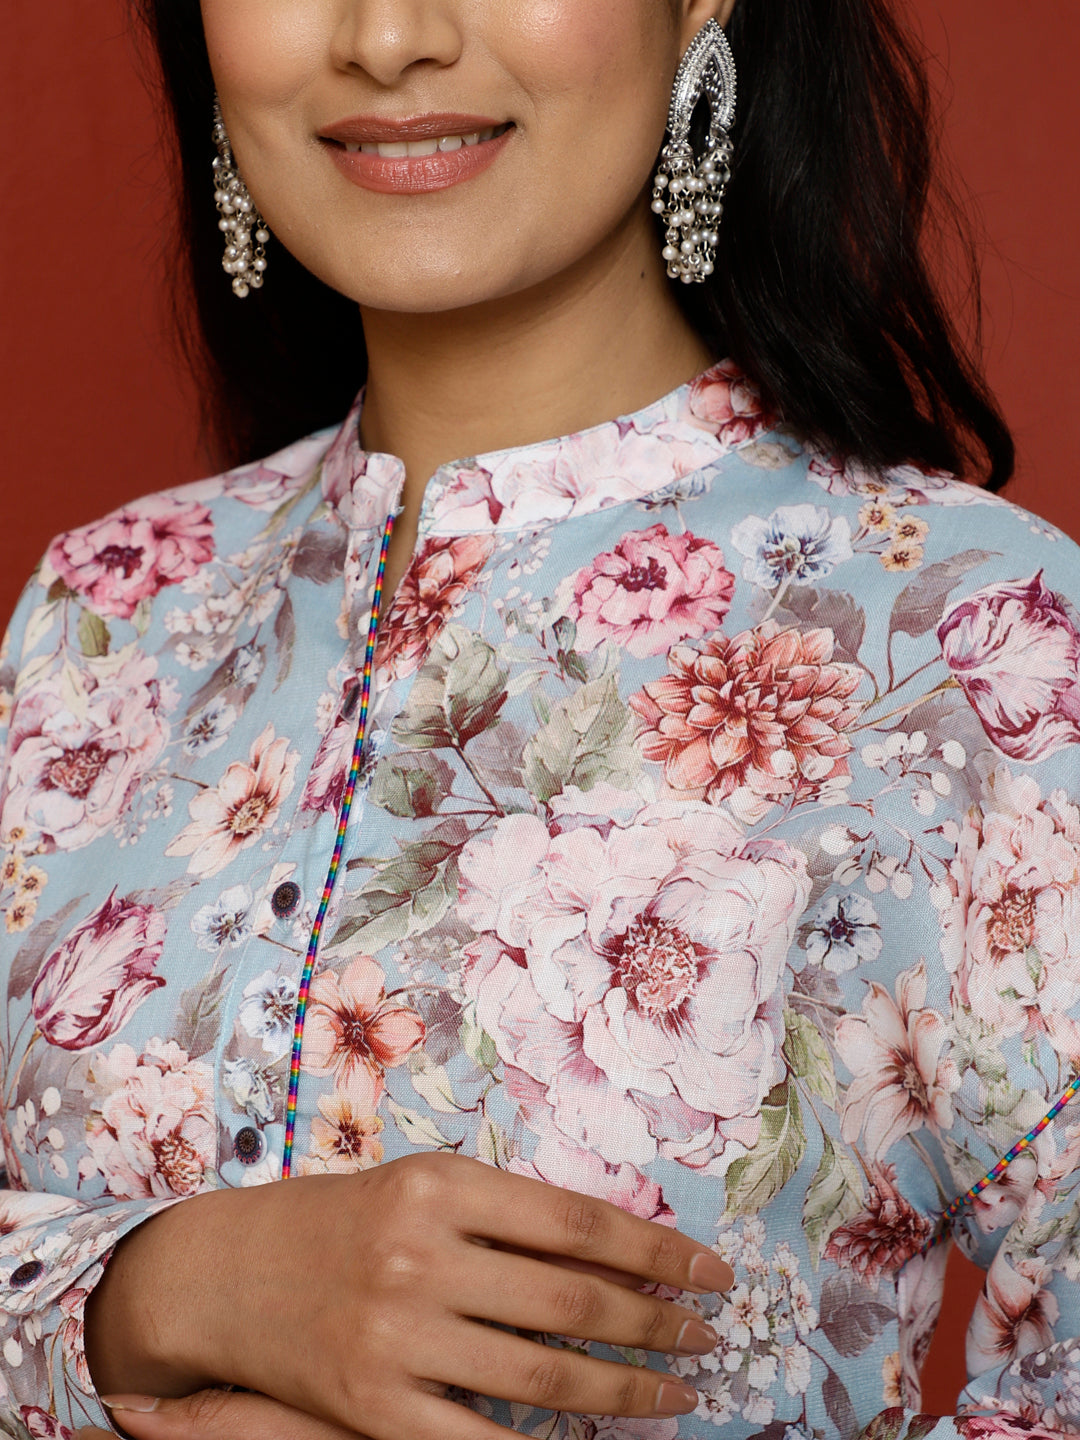 Blue Floral Printed Kurta With Palazzo Co-ord Set